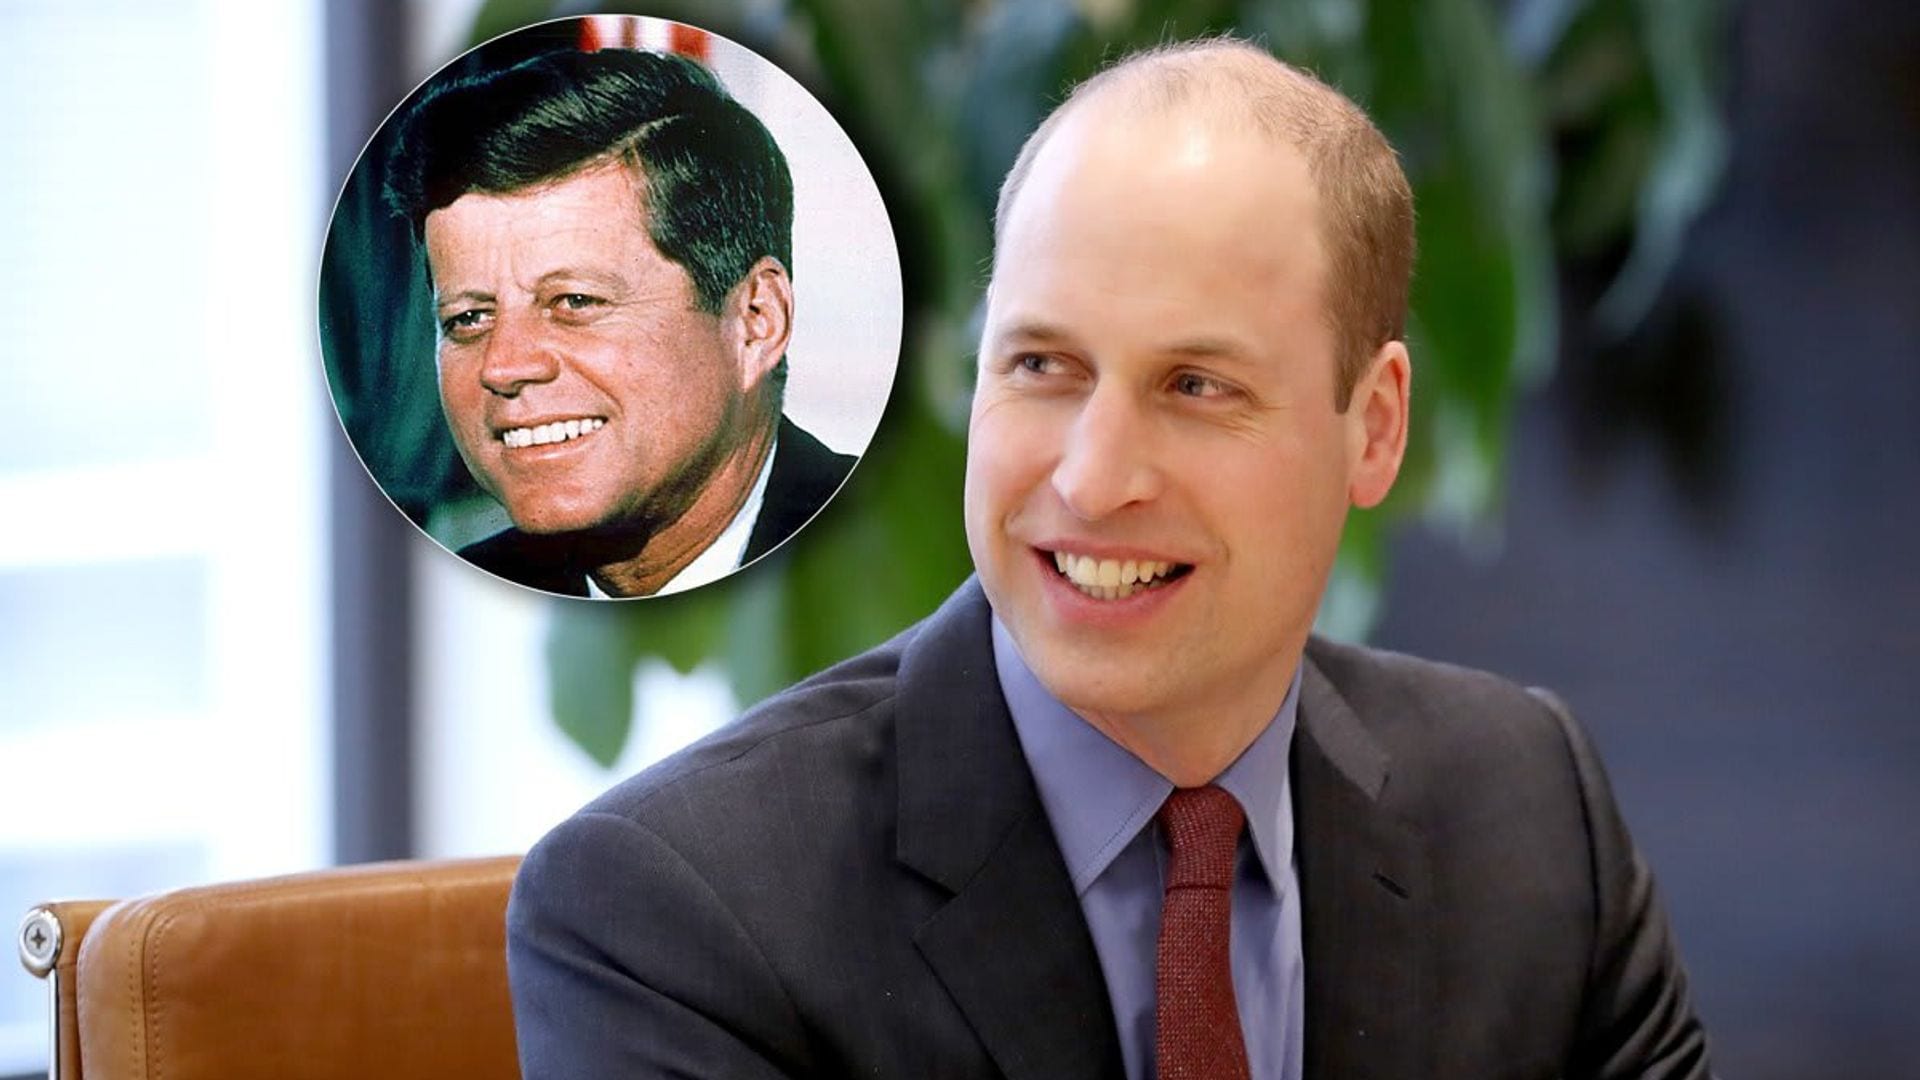 JFK's daughter talks about Prince William's 'great tribute' to her father